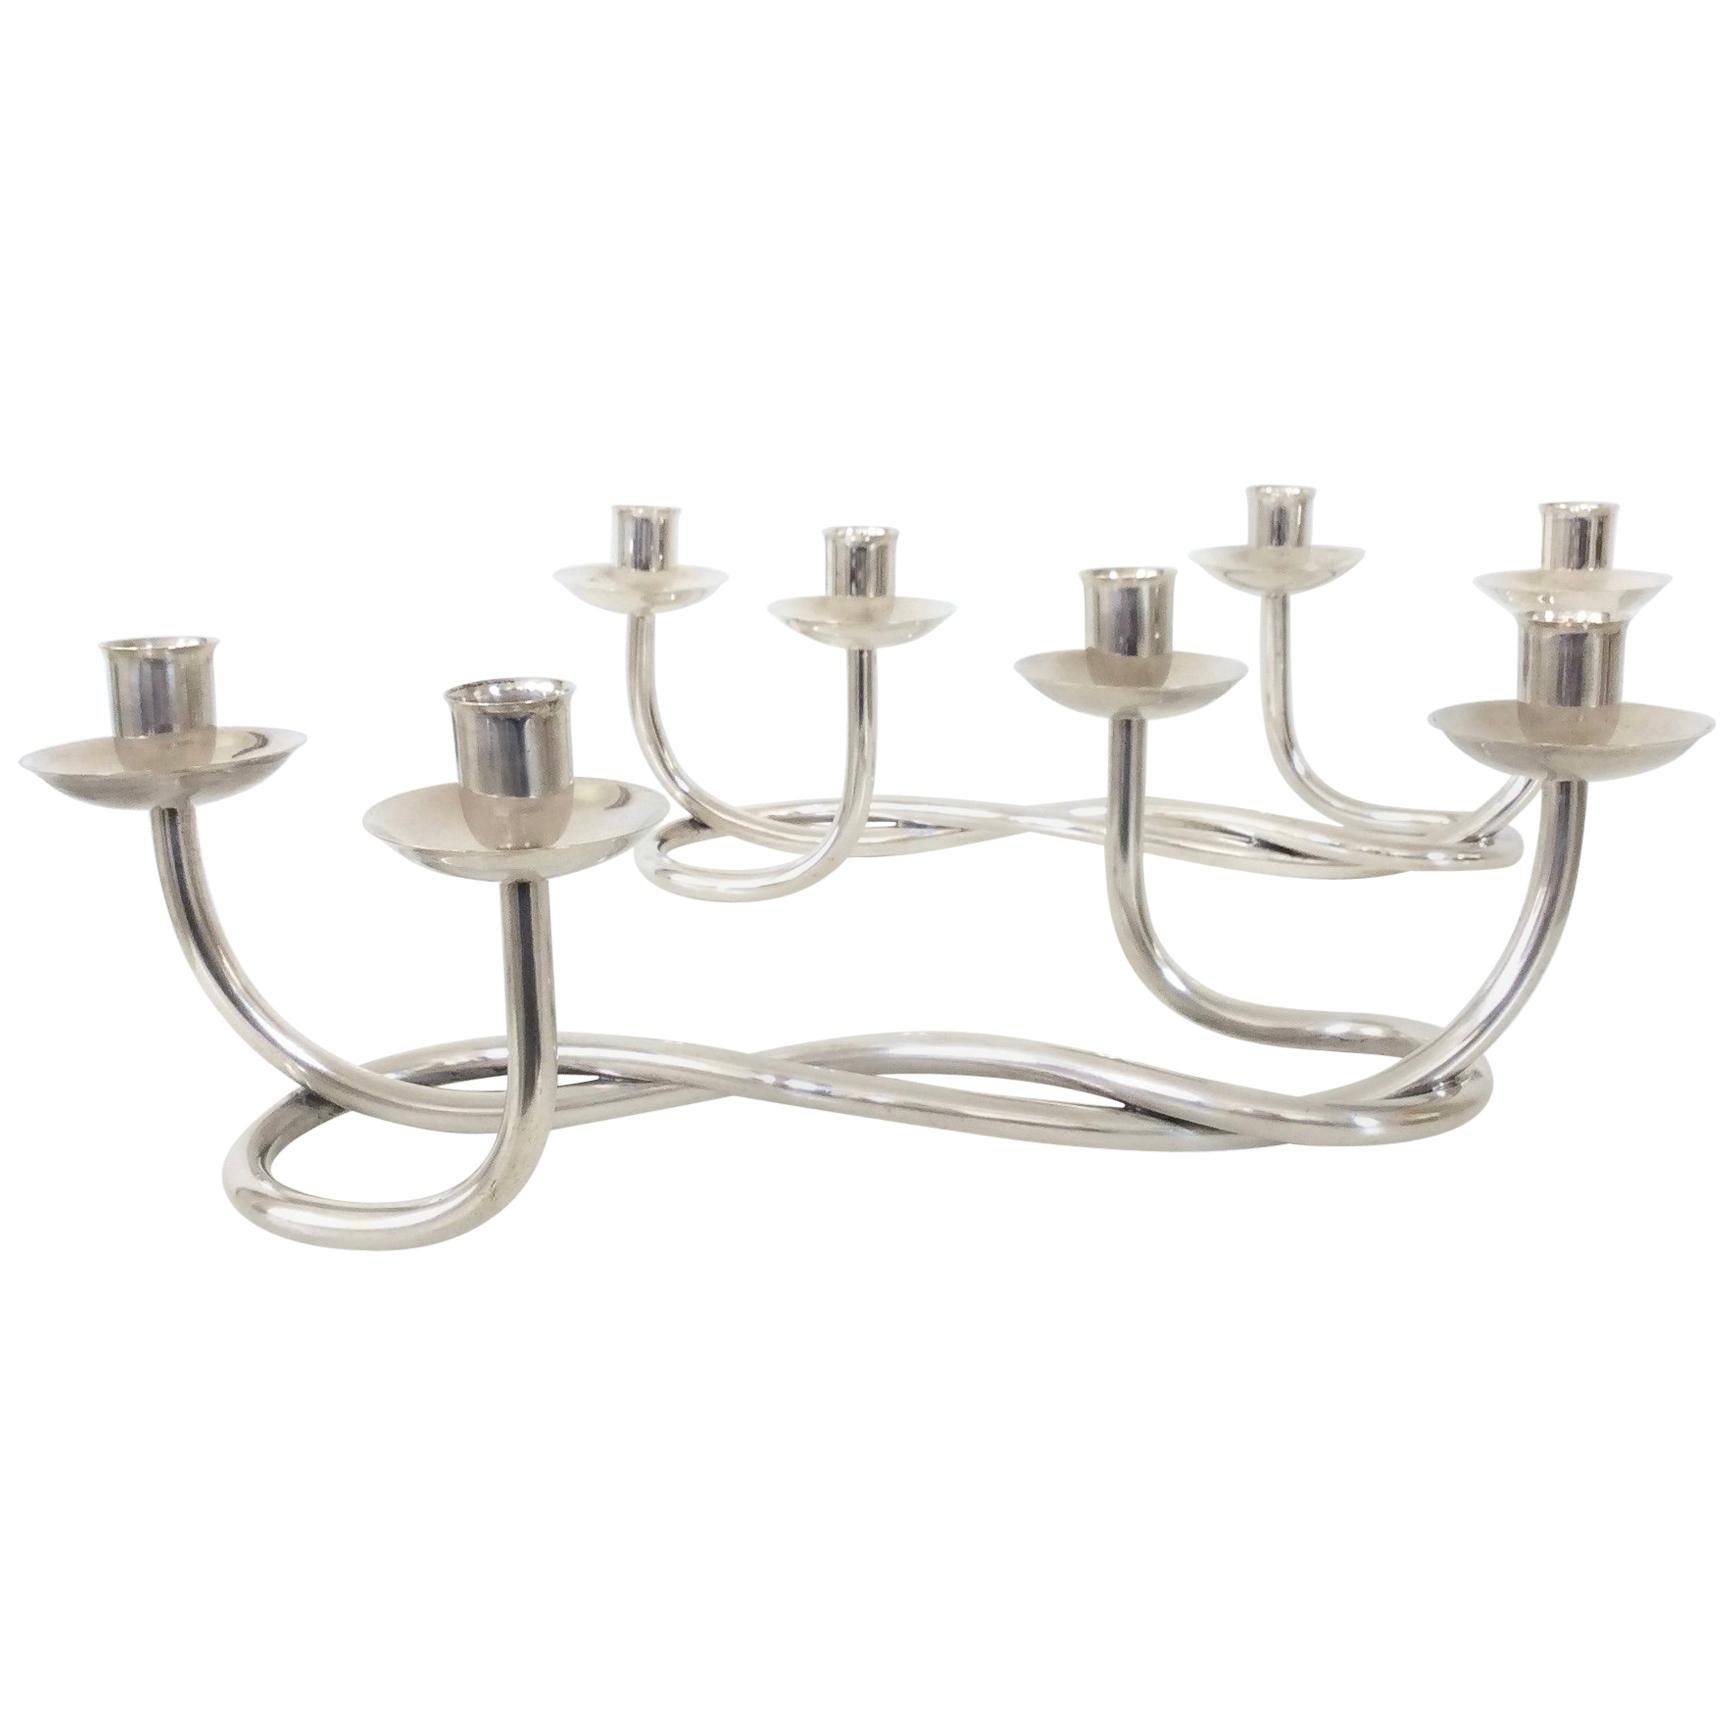 Pair of Silverplated Candleholders, circa 1960, Italy